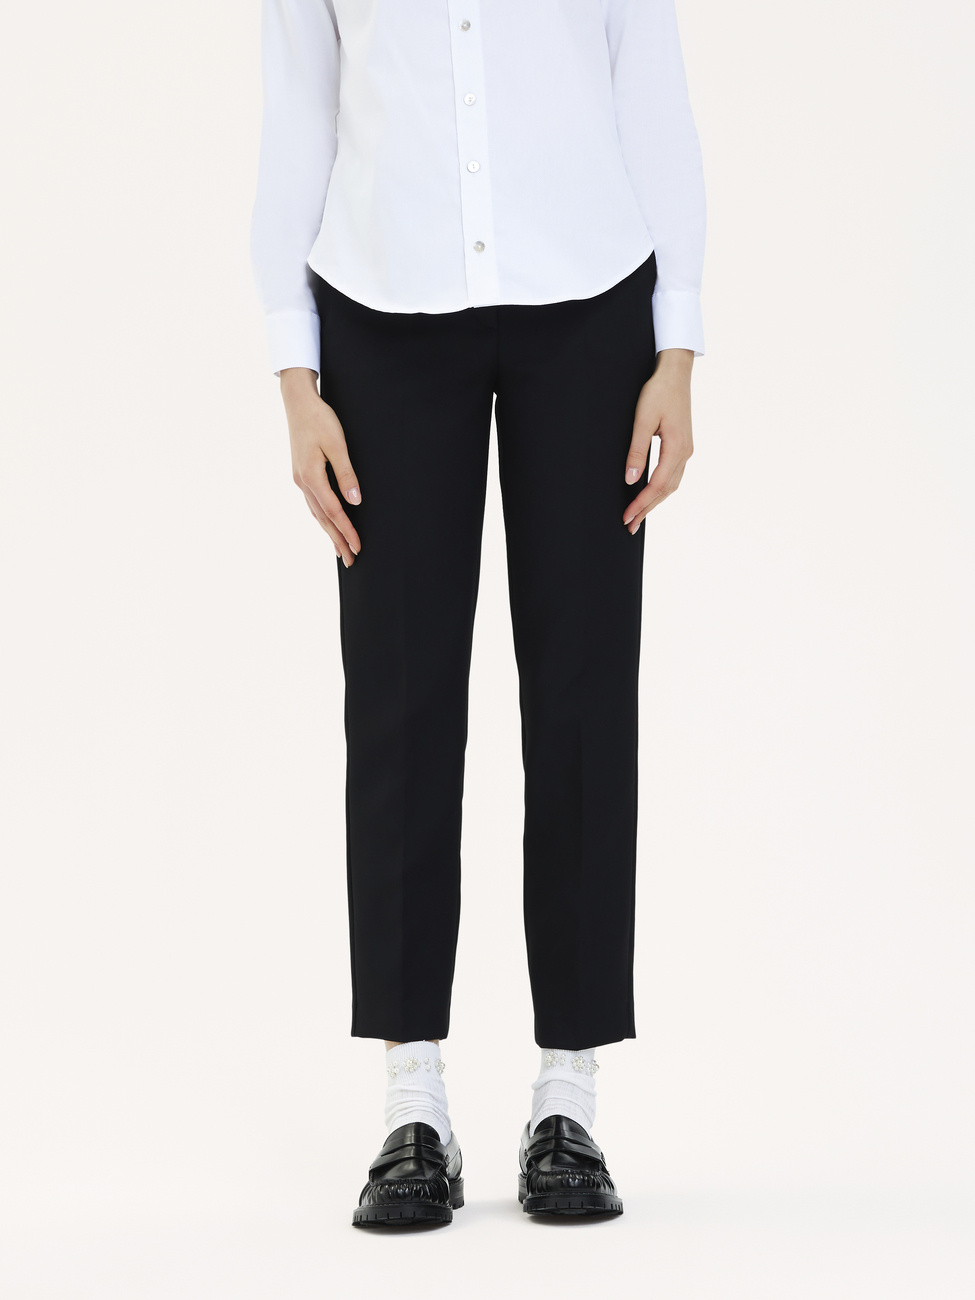 Dress pants with a crease